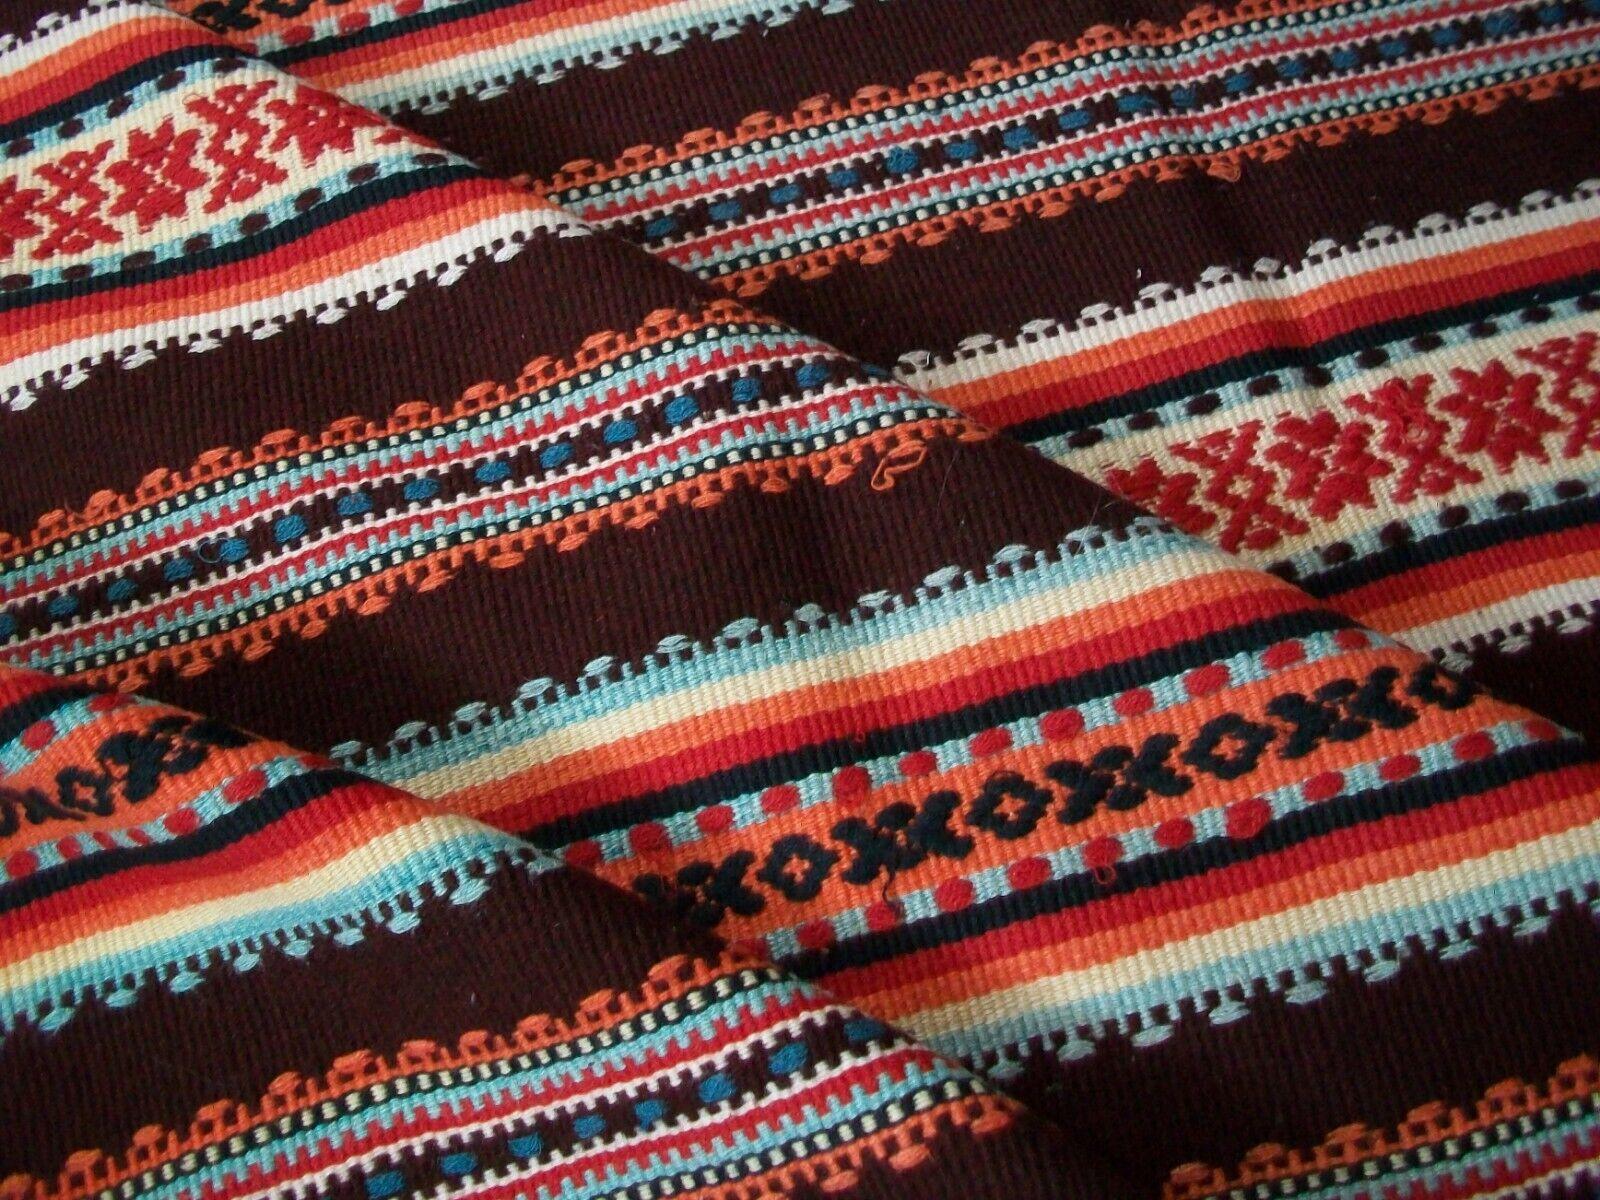 Hand-Woven Vintage Embroidered Wool Serape Blanket or Rug, Mexico, C.1970's